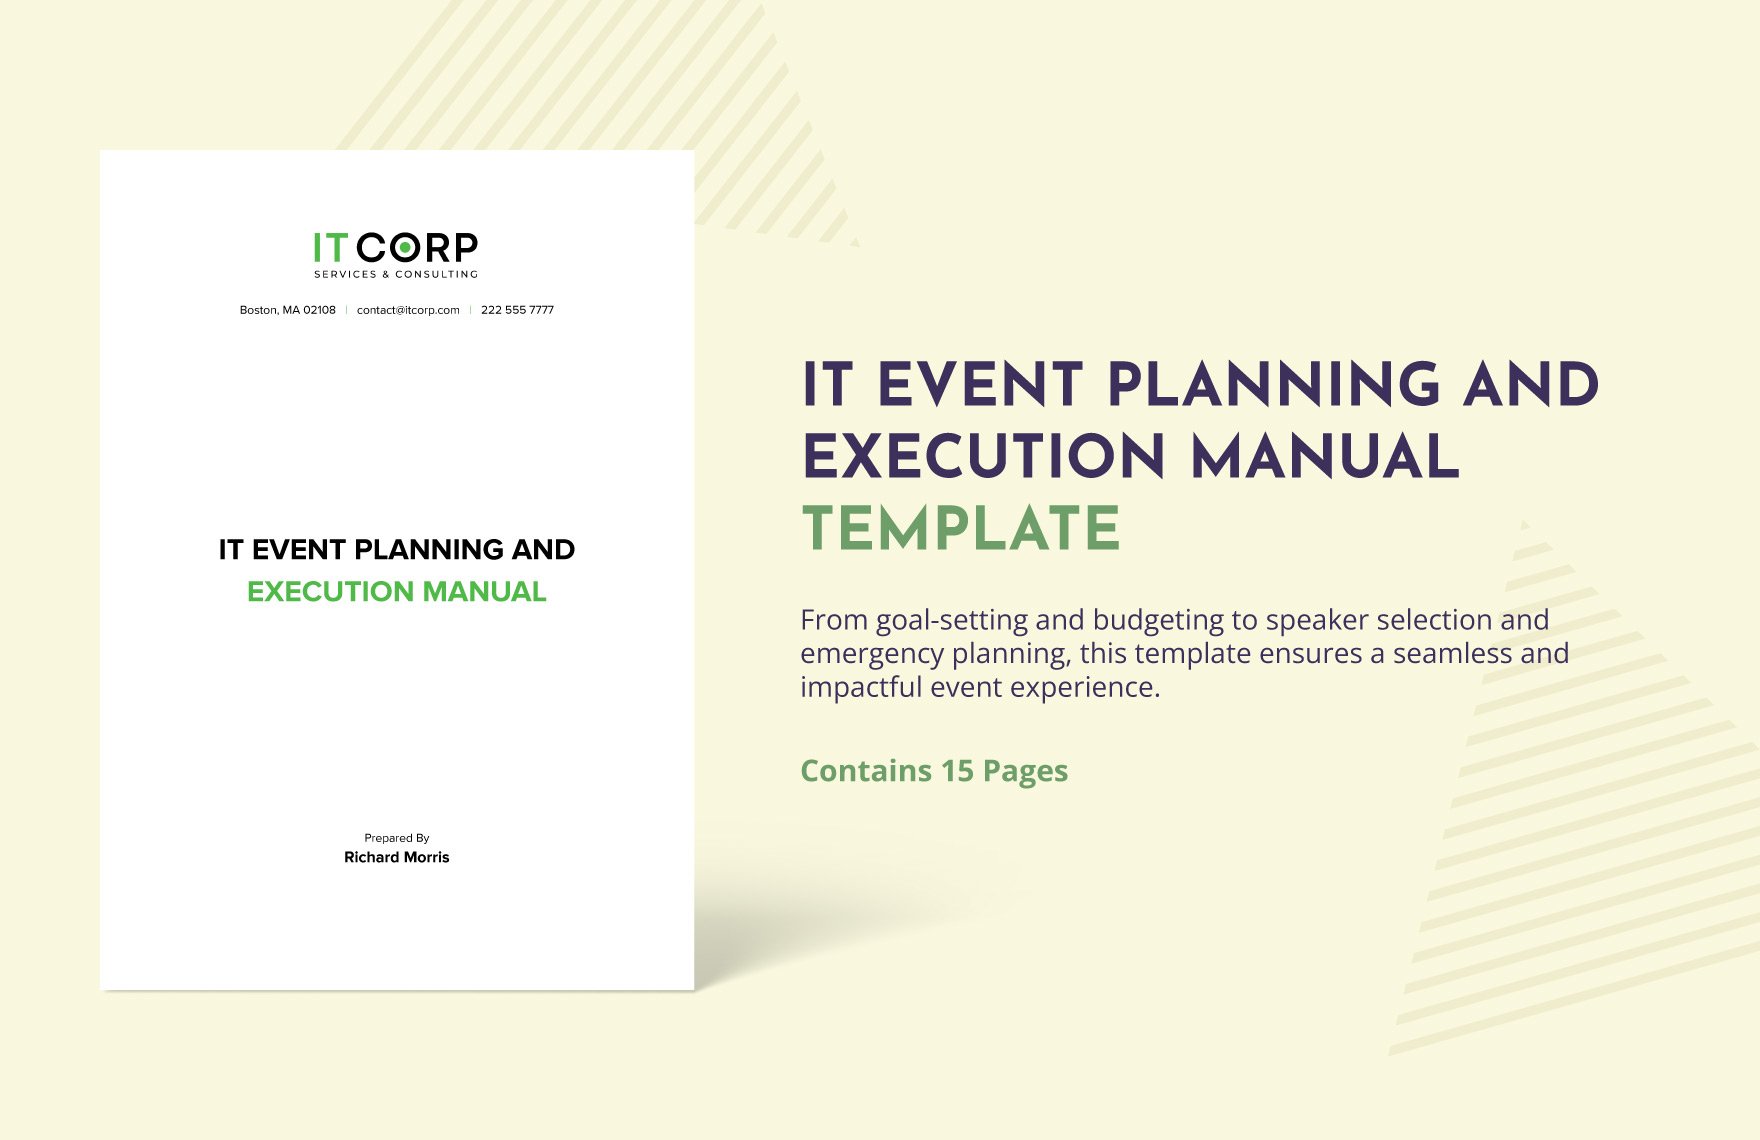 IT Event Planning and Execution Manual Template